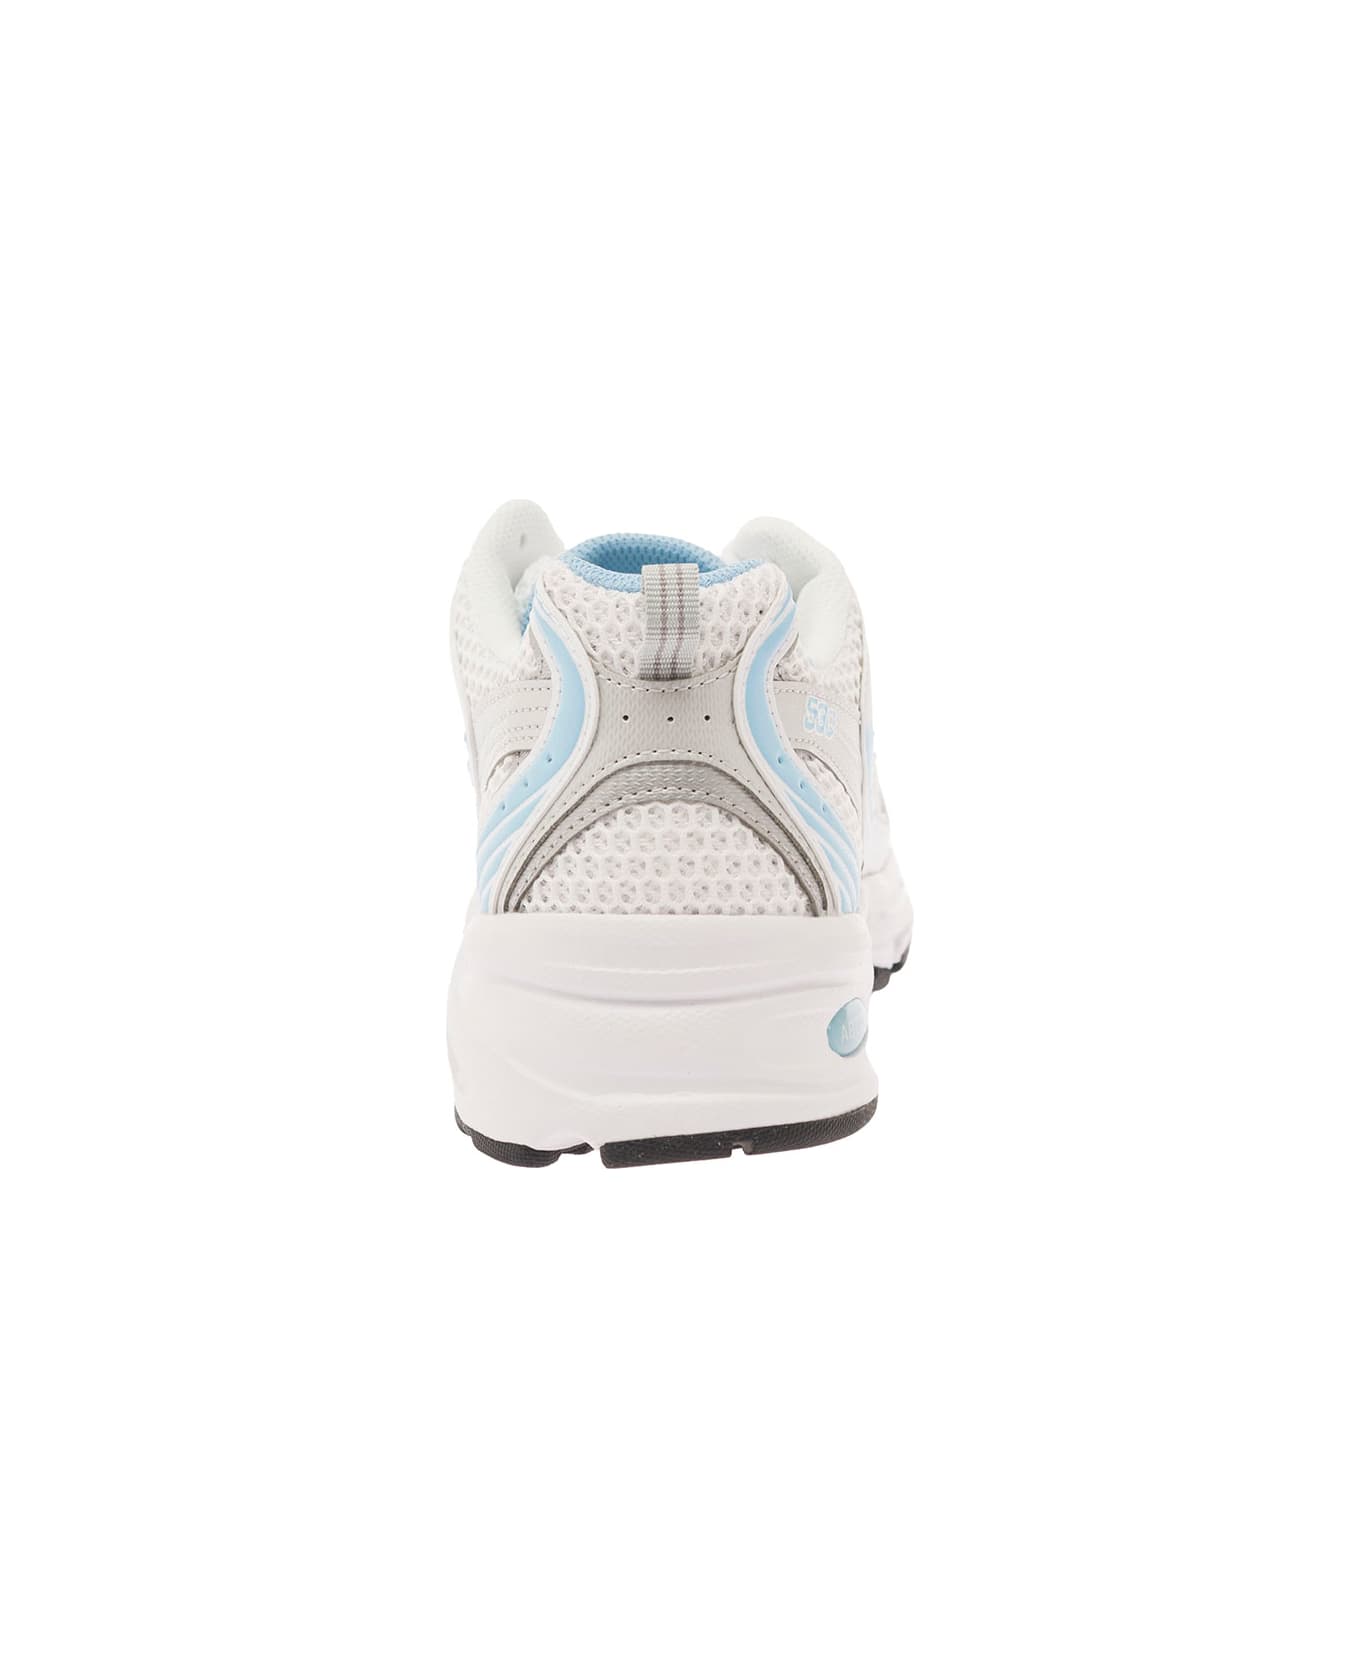 New Balance '530' White And Light Blue Low Top Sneakers With Logo Patch In Tech Fabric Man - White スニーカー